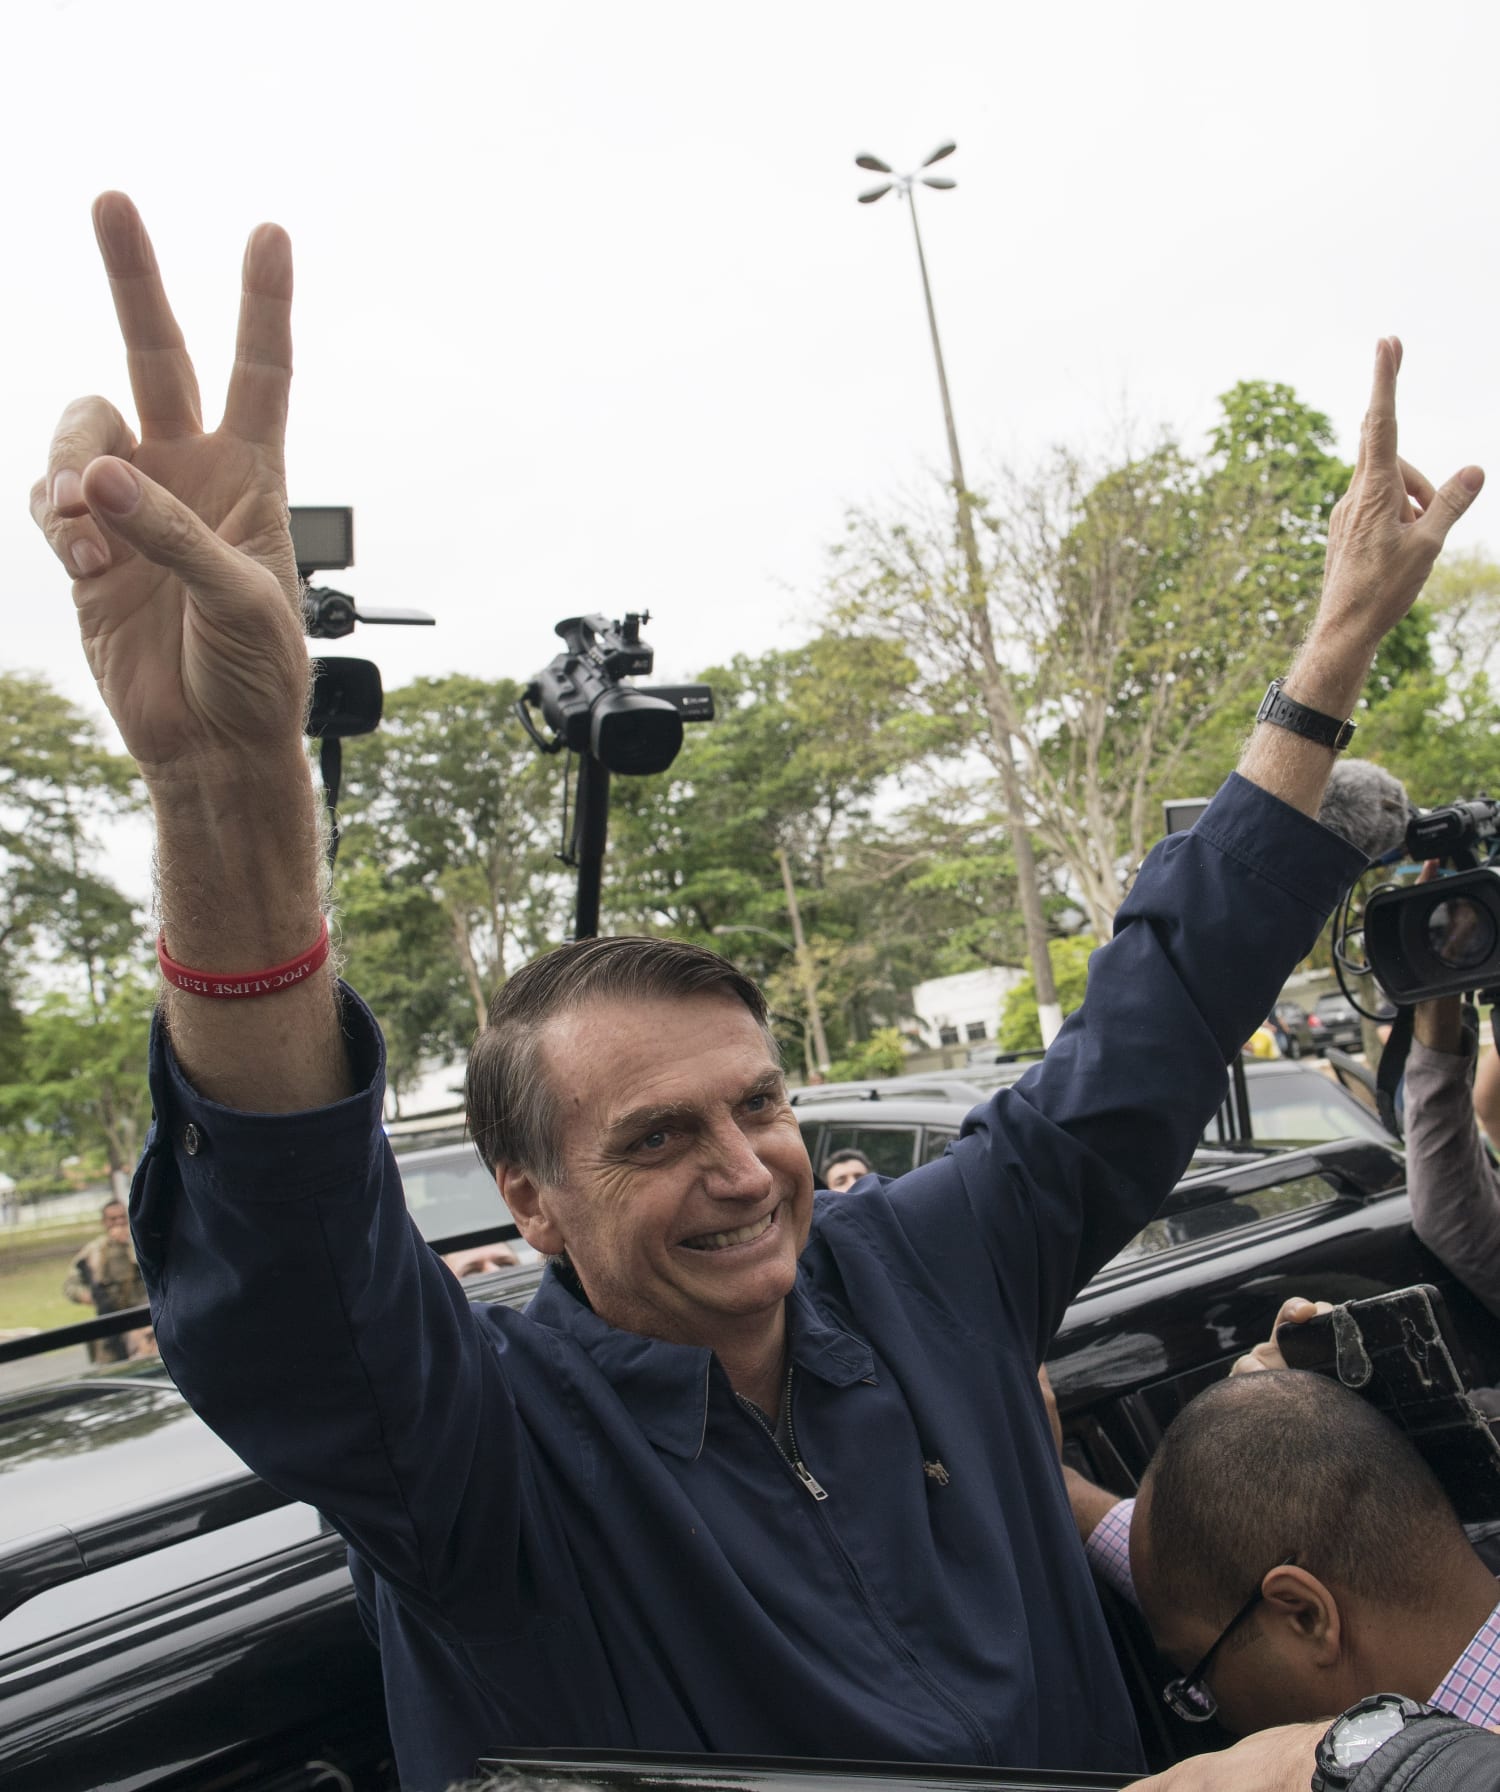 Right-wing wins in Brazil's Congress show staying power of 'Bolsonarismo